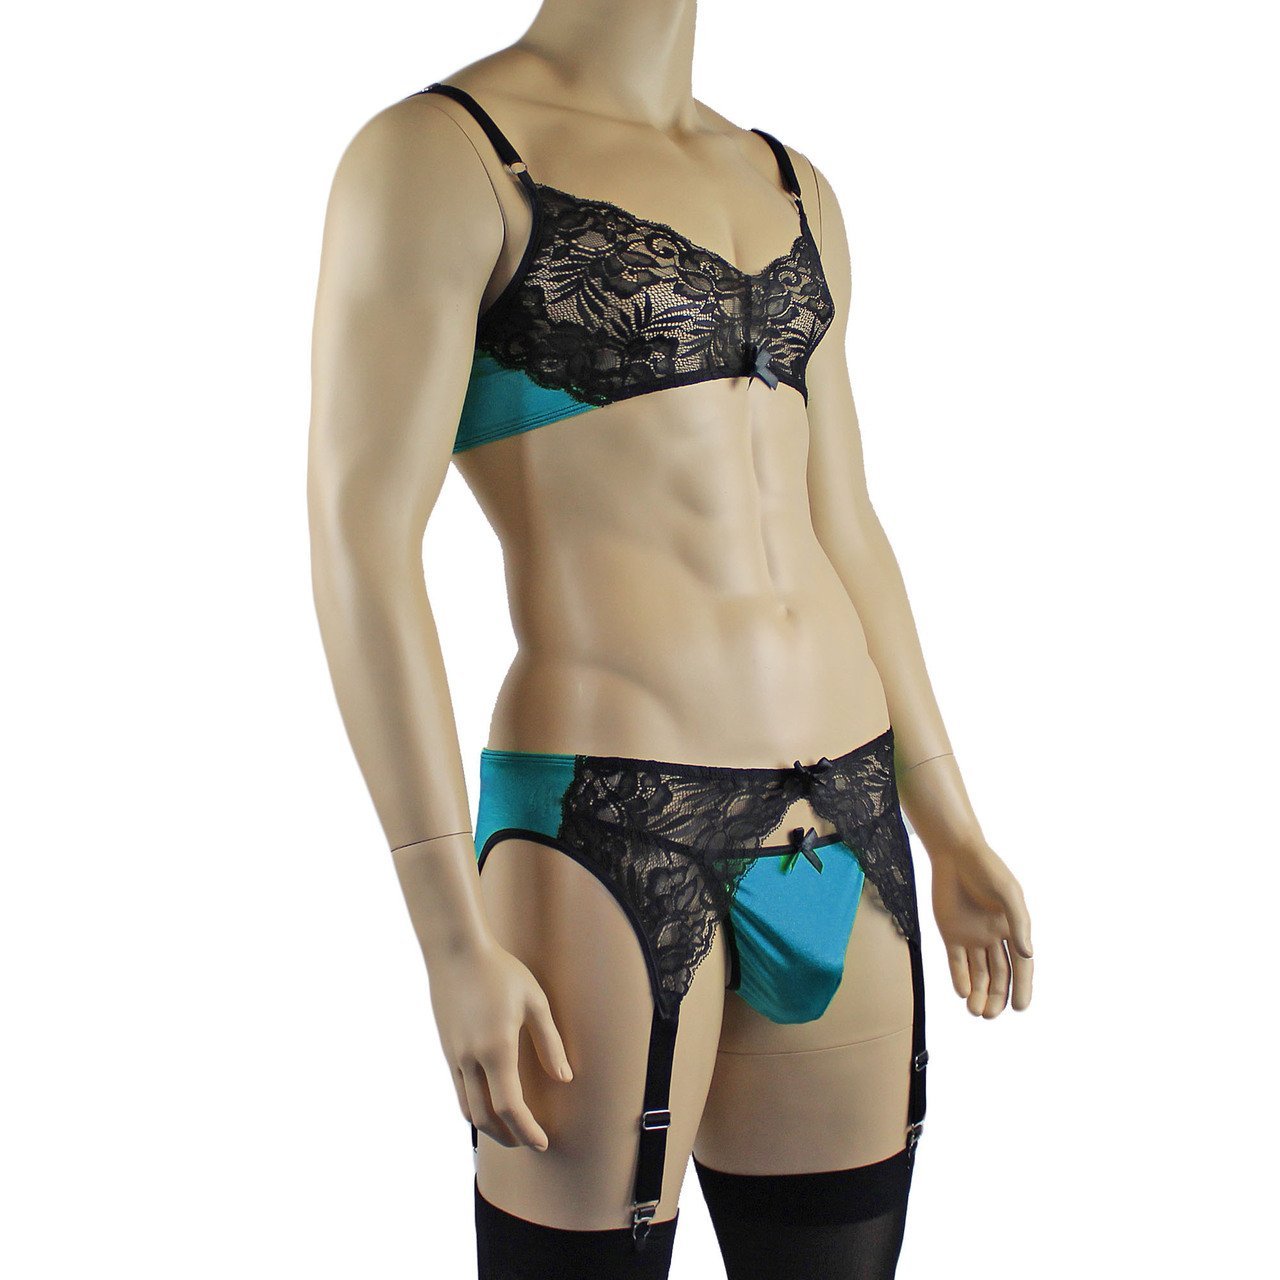 Mens Risque Bra Top, G string and Garterbelt (green and black plus other colours)